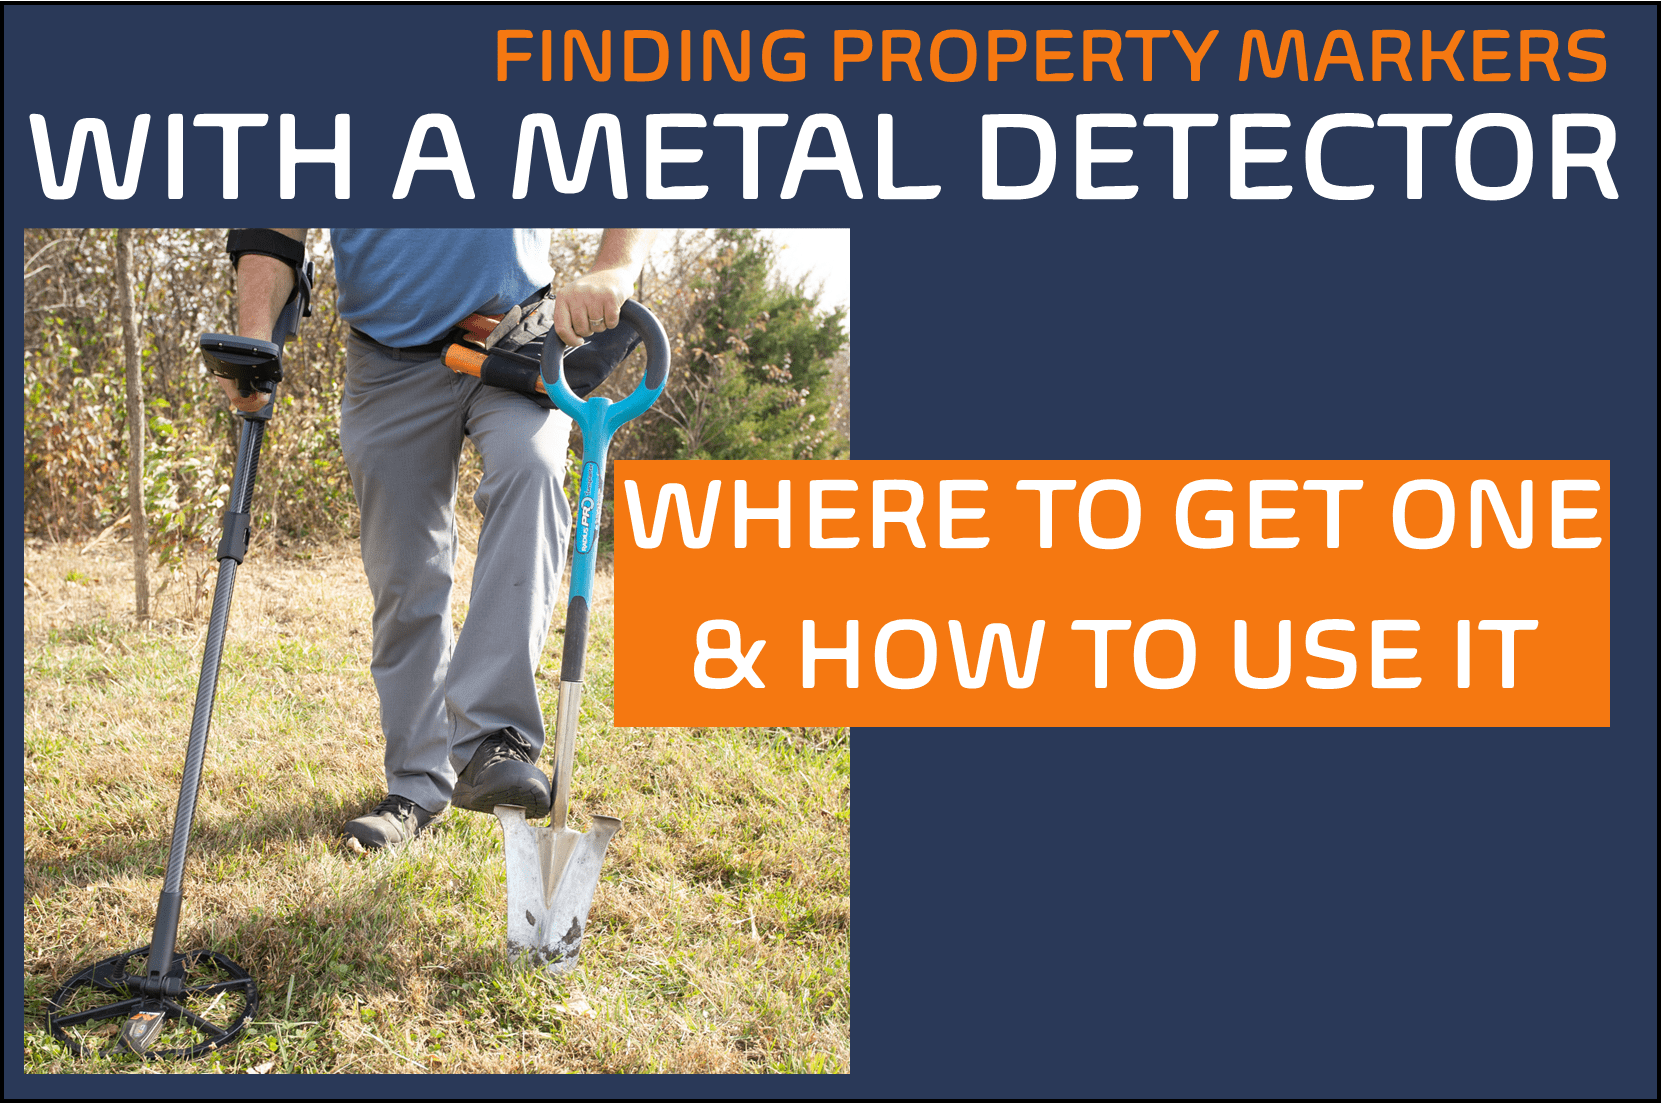 FAQ: How do I use a metal detector to find property pins/markers